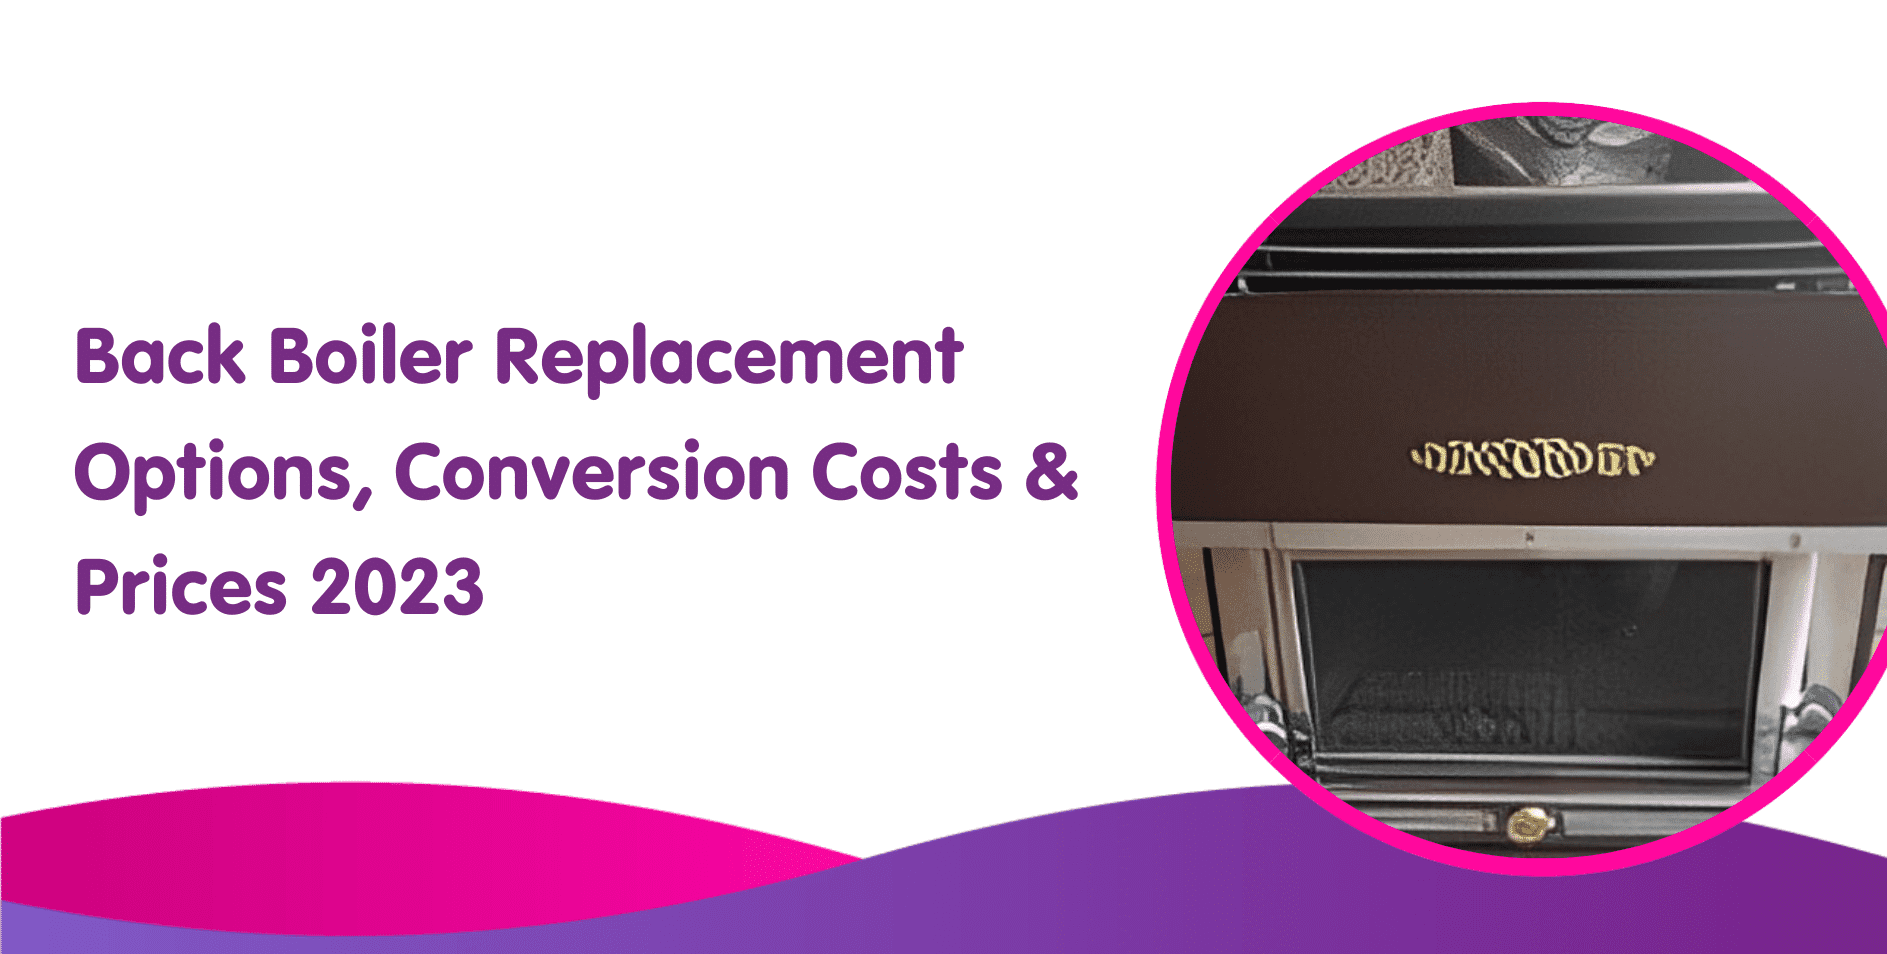 Back Boiler Replacement Options, Conversion Costs & Prices 2023